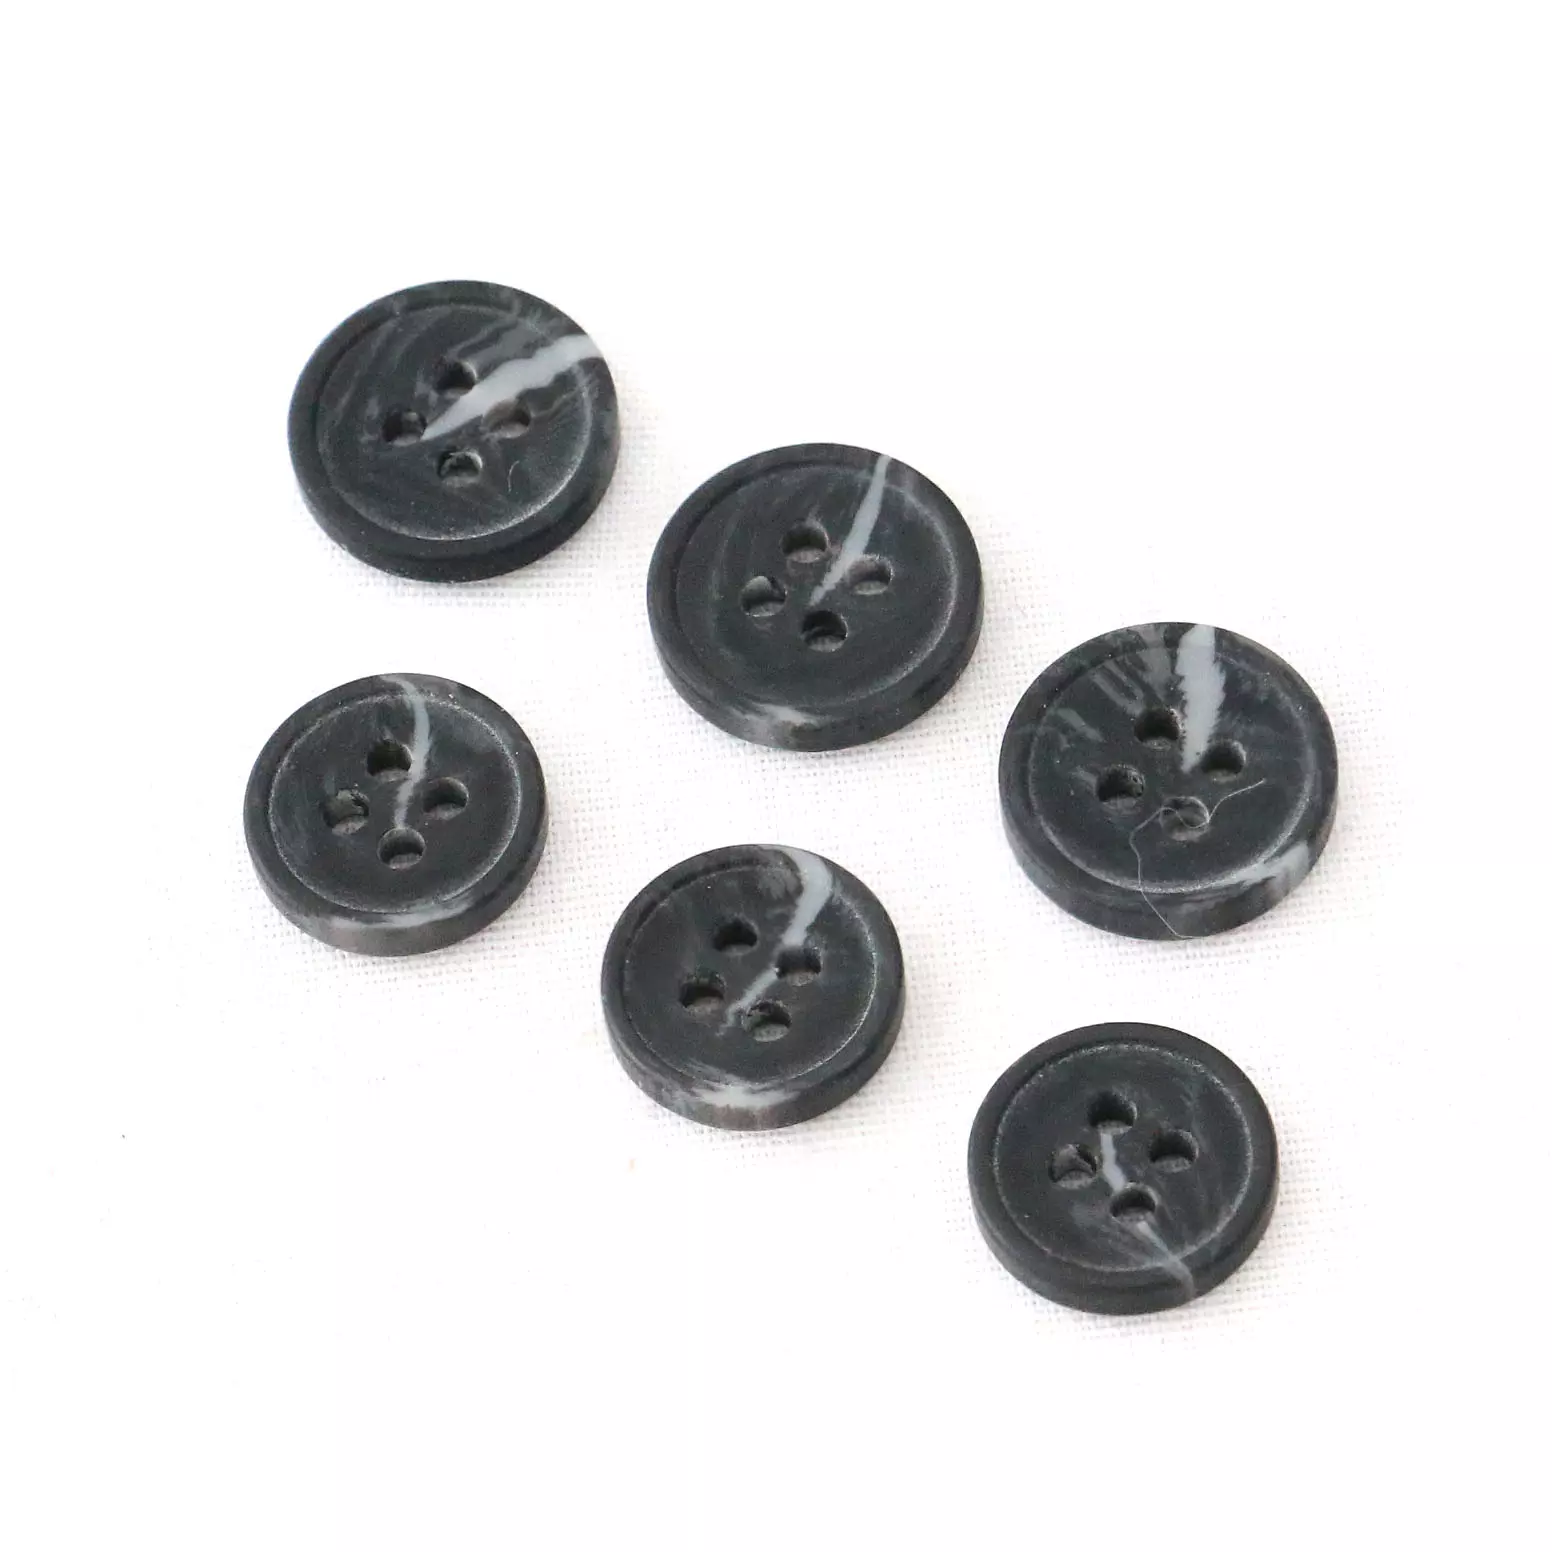 Stylized Resin Buttons | GoldStar Tool